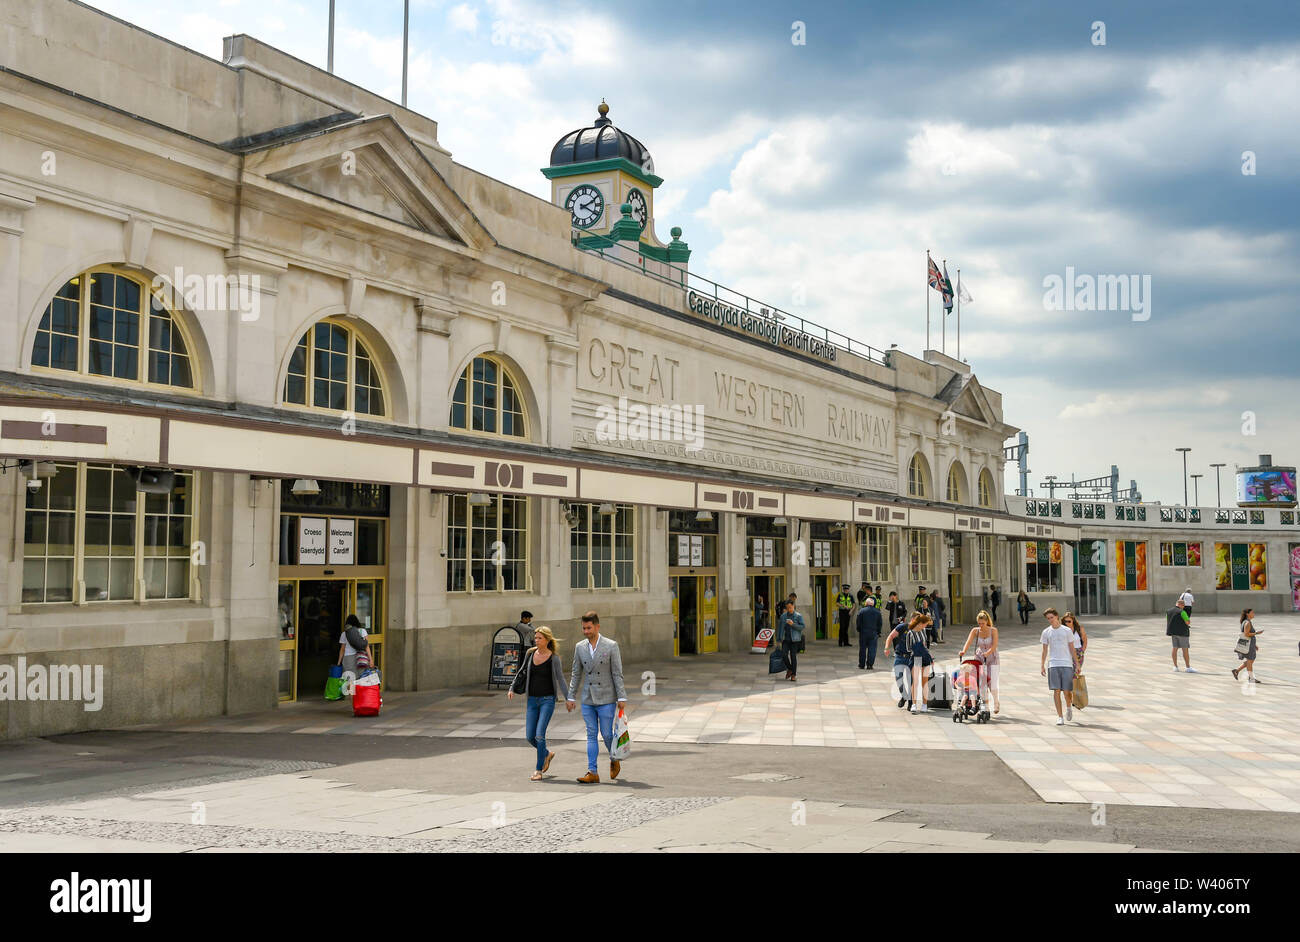 Free Stock photo of Building at Cardiff Central Station